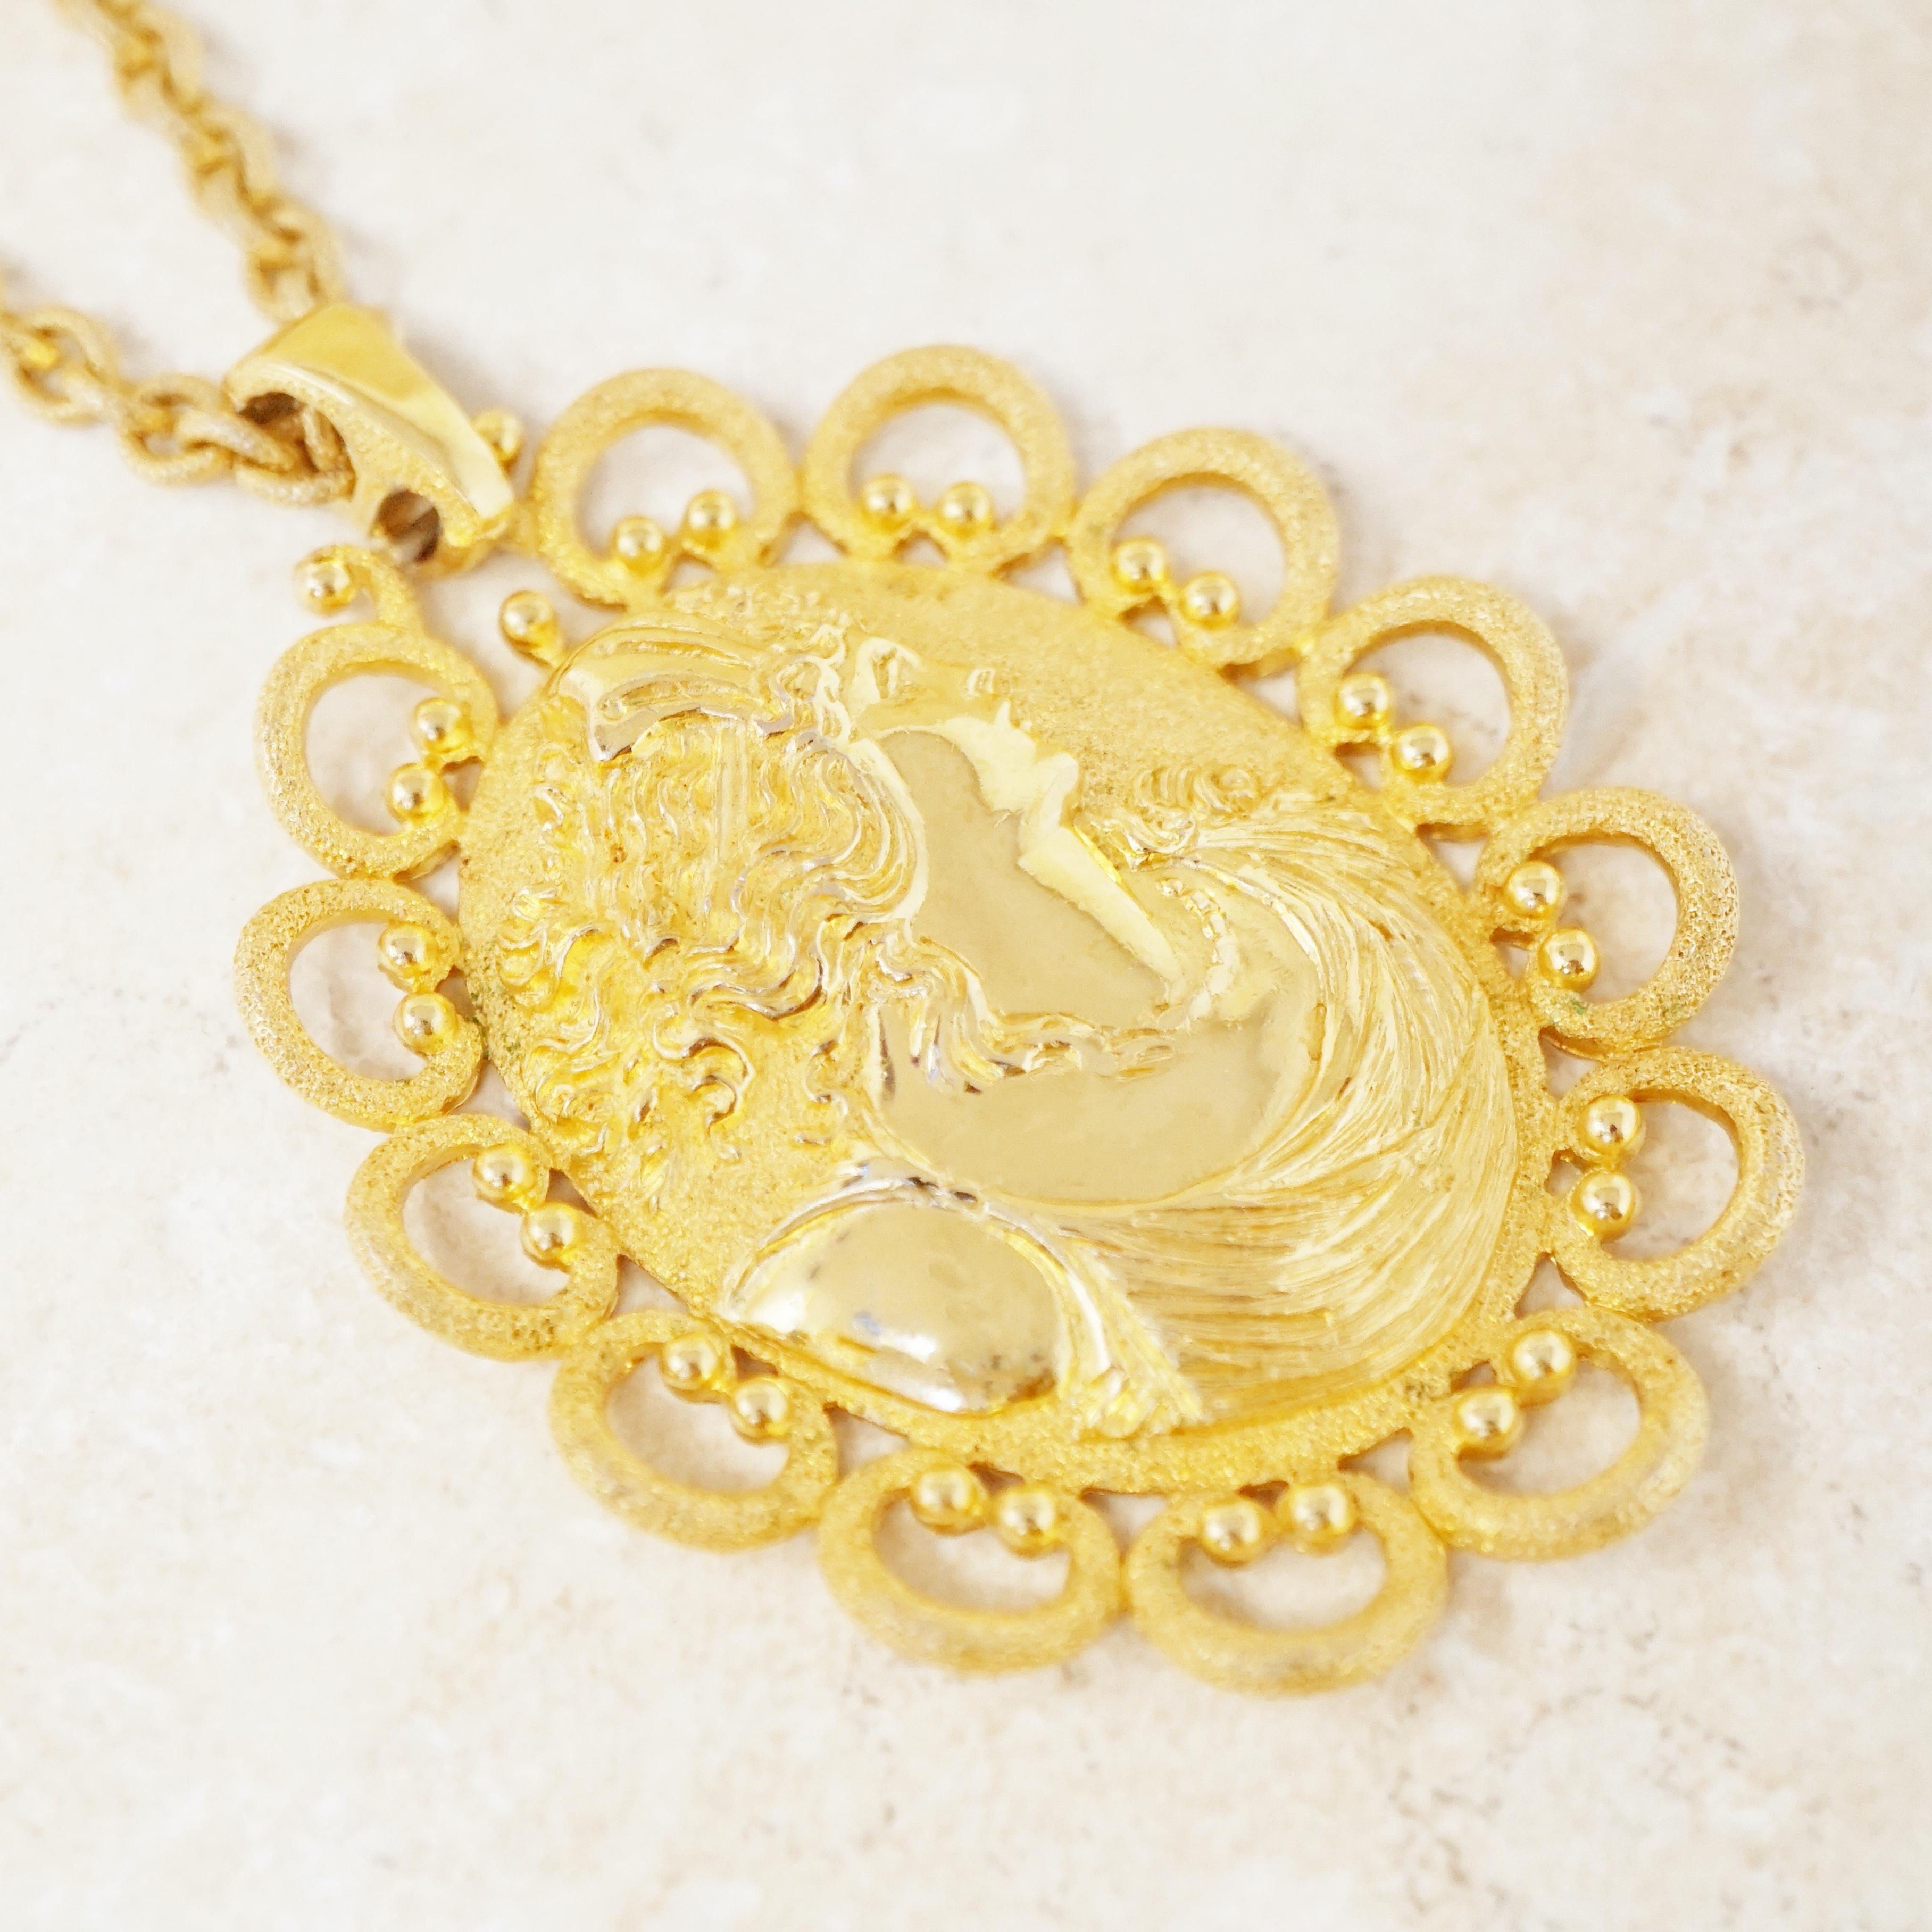 Vintage Gilded Roman Goddess Cameo Pendant Necklace by Trifari, 1960s In Excellent Condition For Sale In McKinney, TX